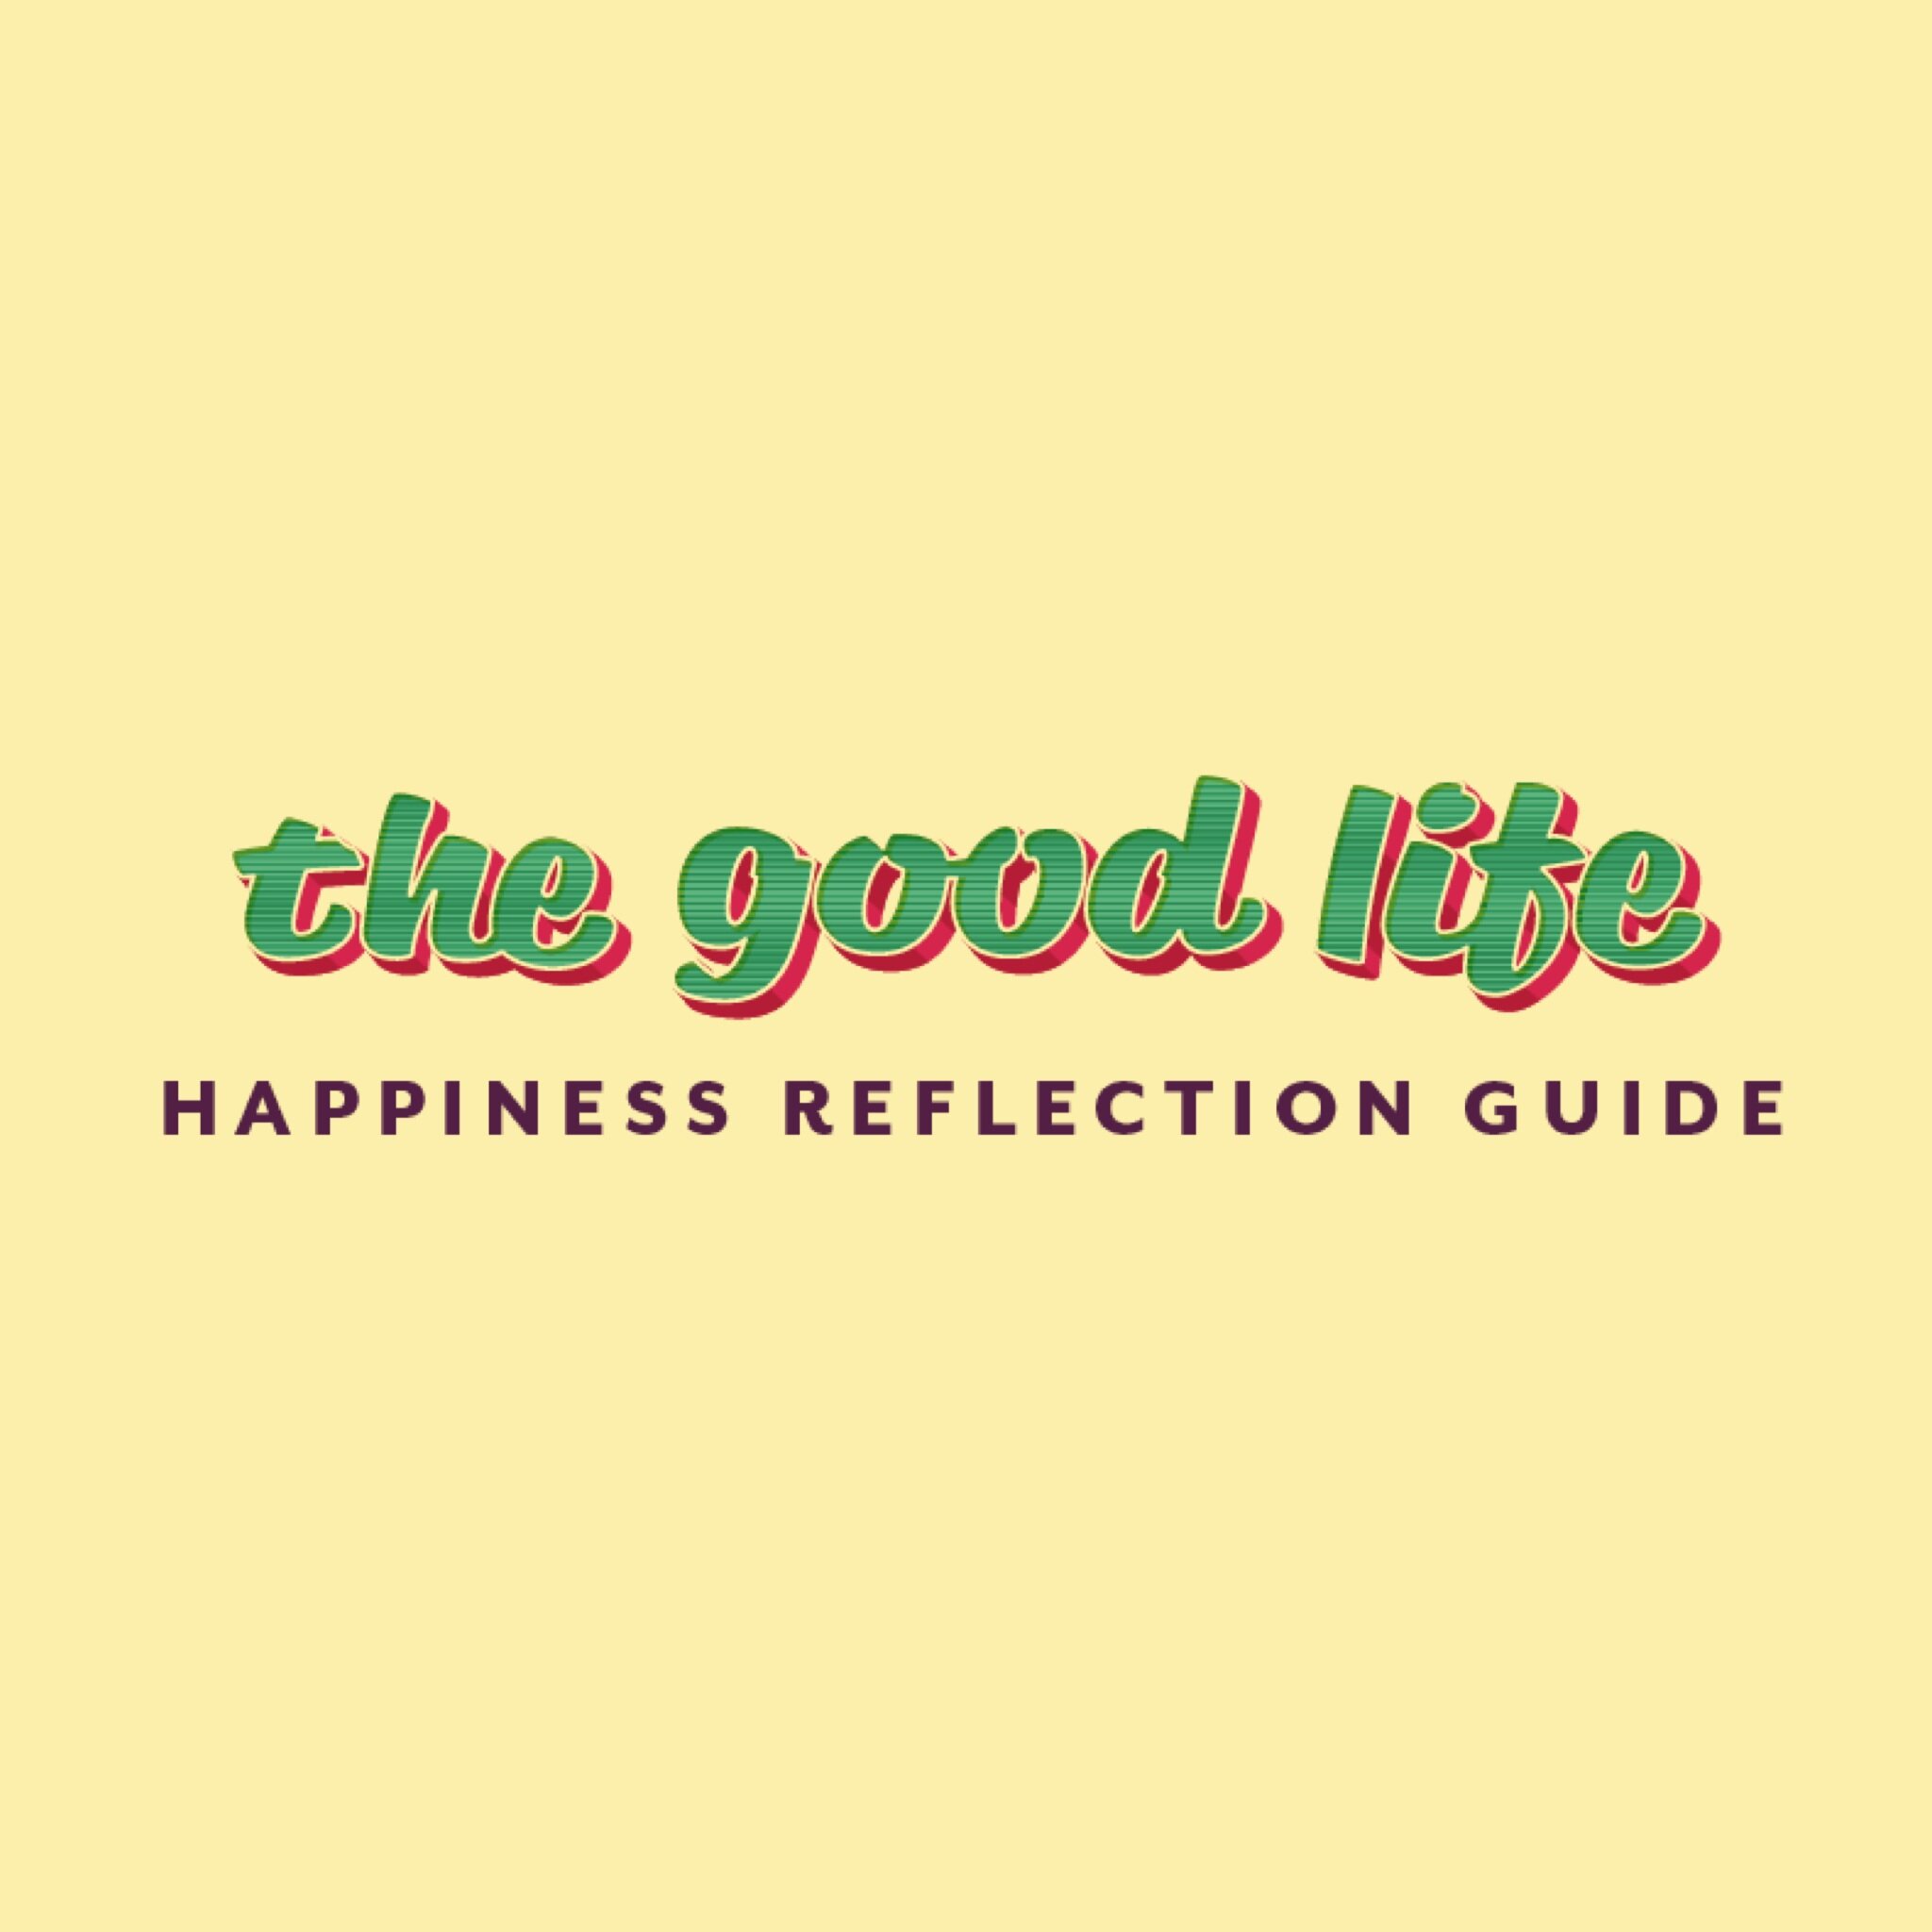 The Good Life Happiness Reflection Guide